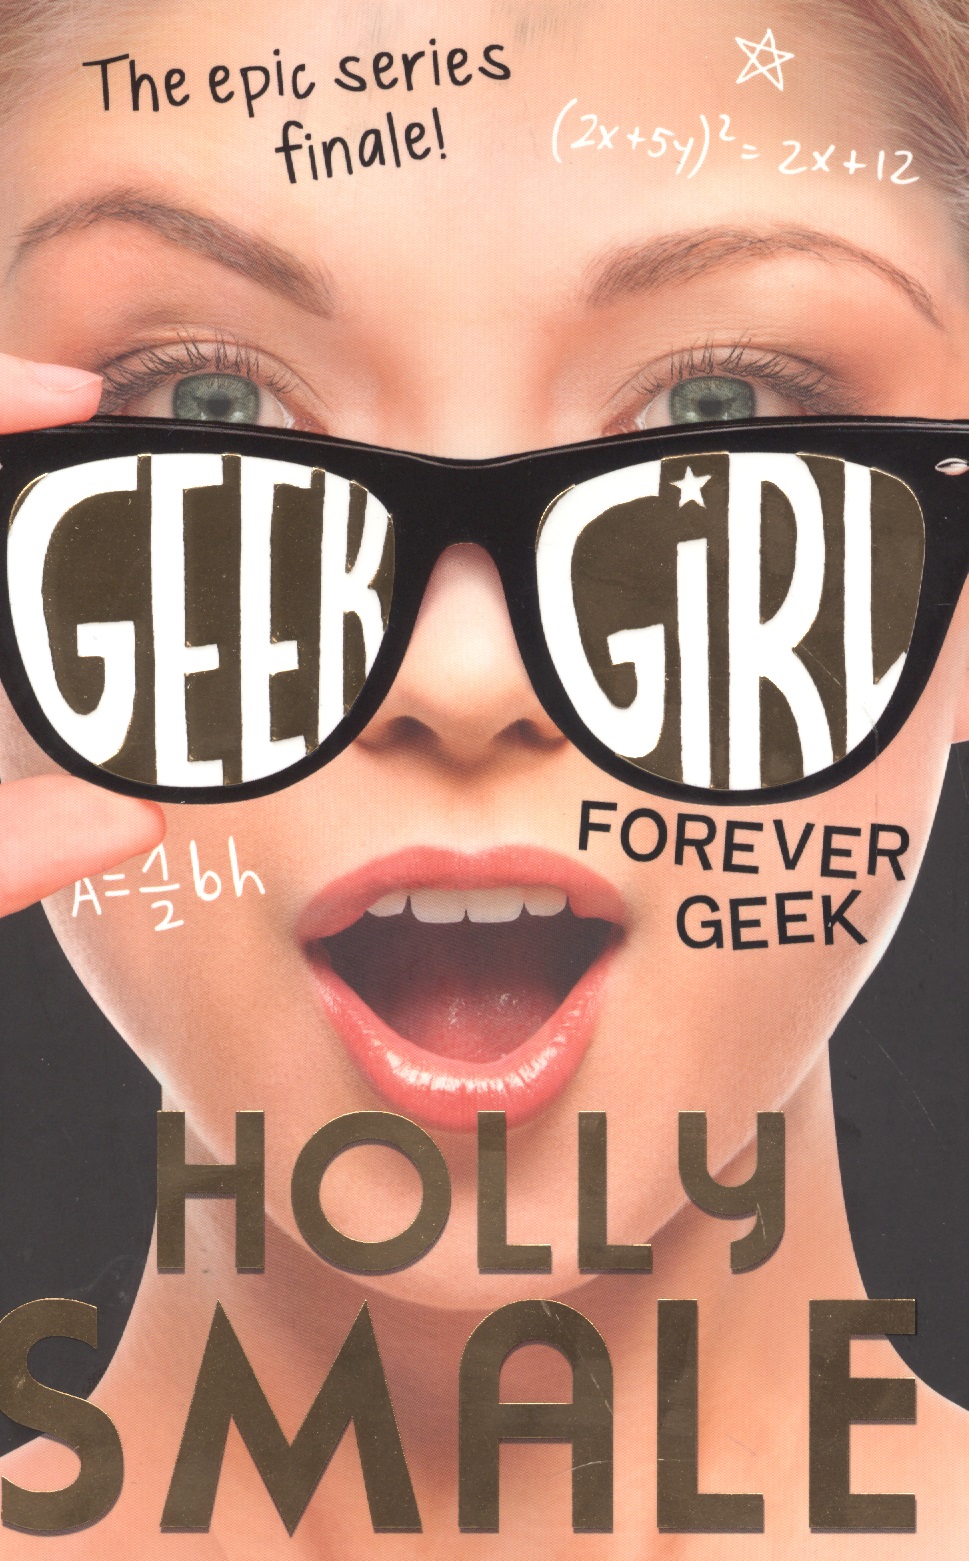 Smale Holly Forever Geek (Geek Girl, Book 6) (м) Smale smale holly happy girl lucky